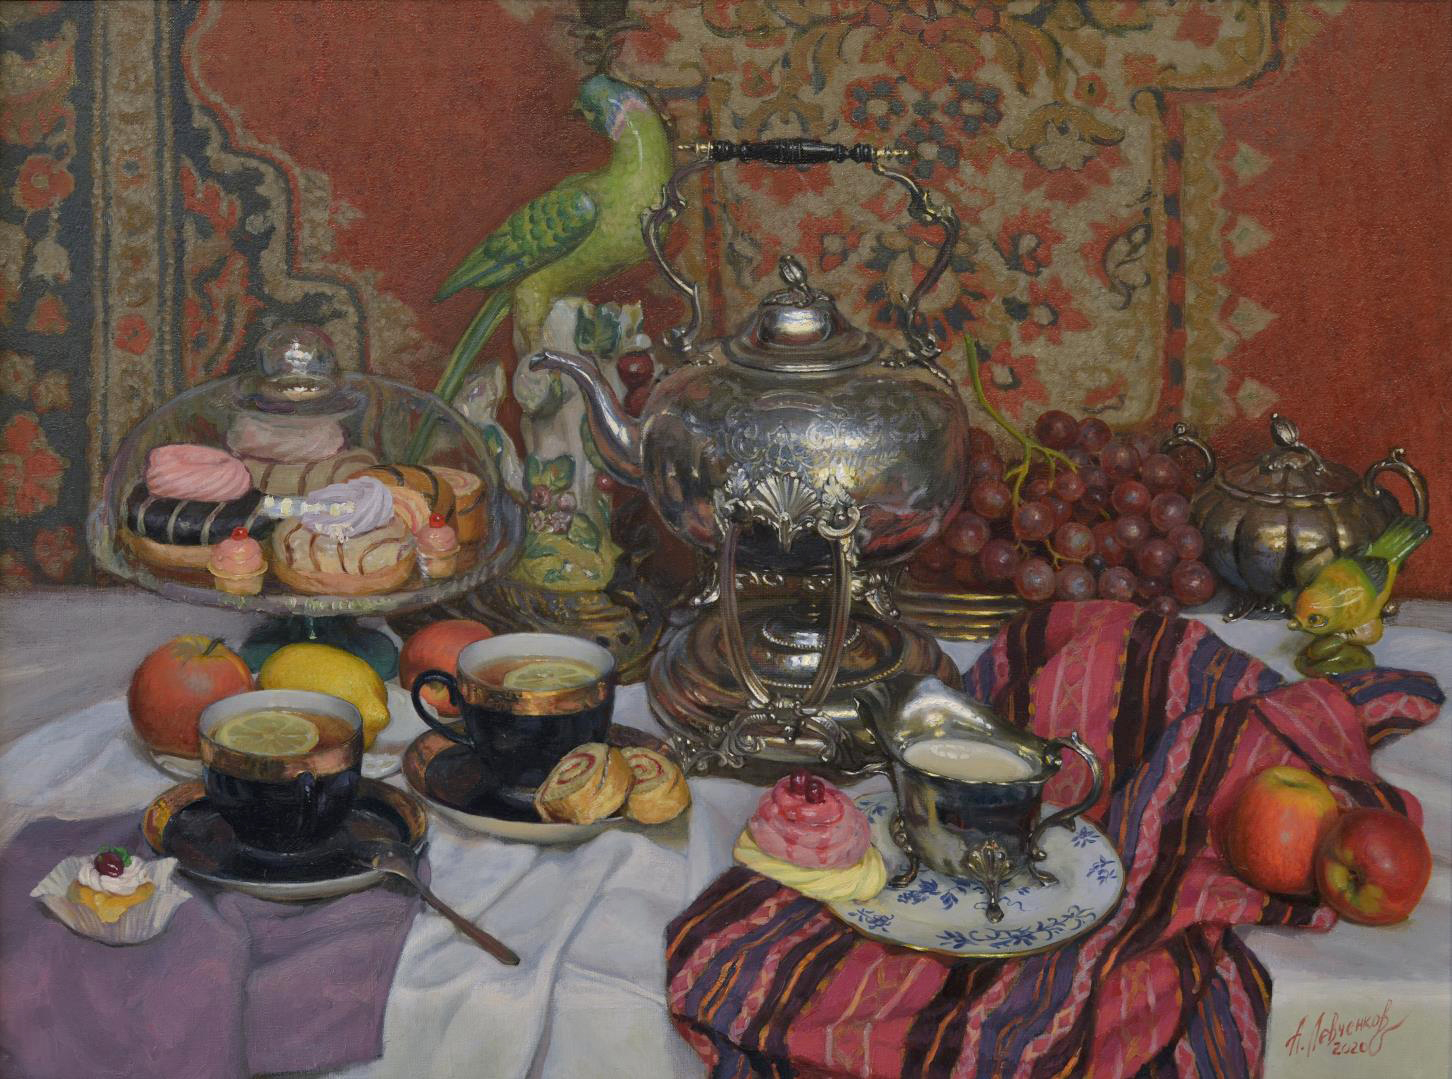 Tea for Two - 1, Alexander Levchenkov, Buy the painting Oil